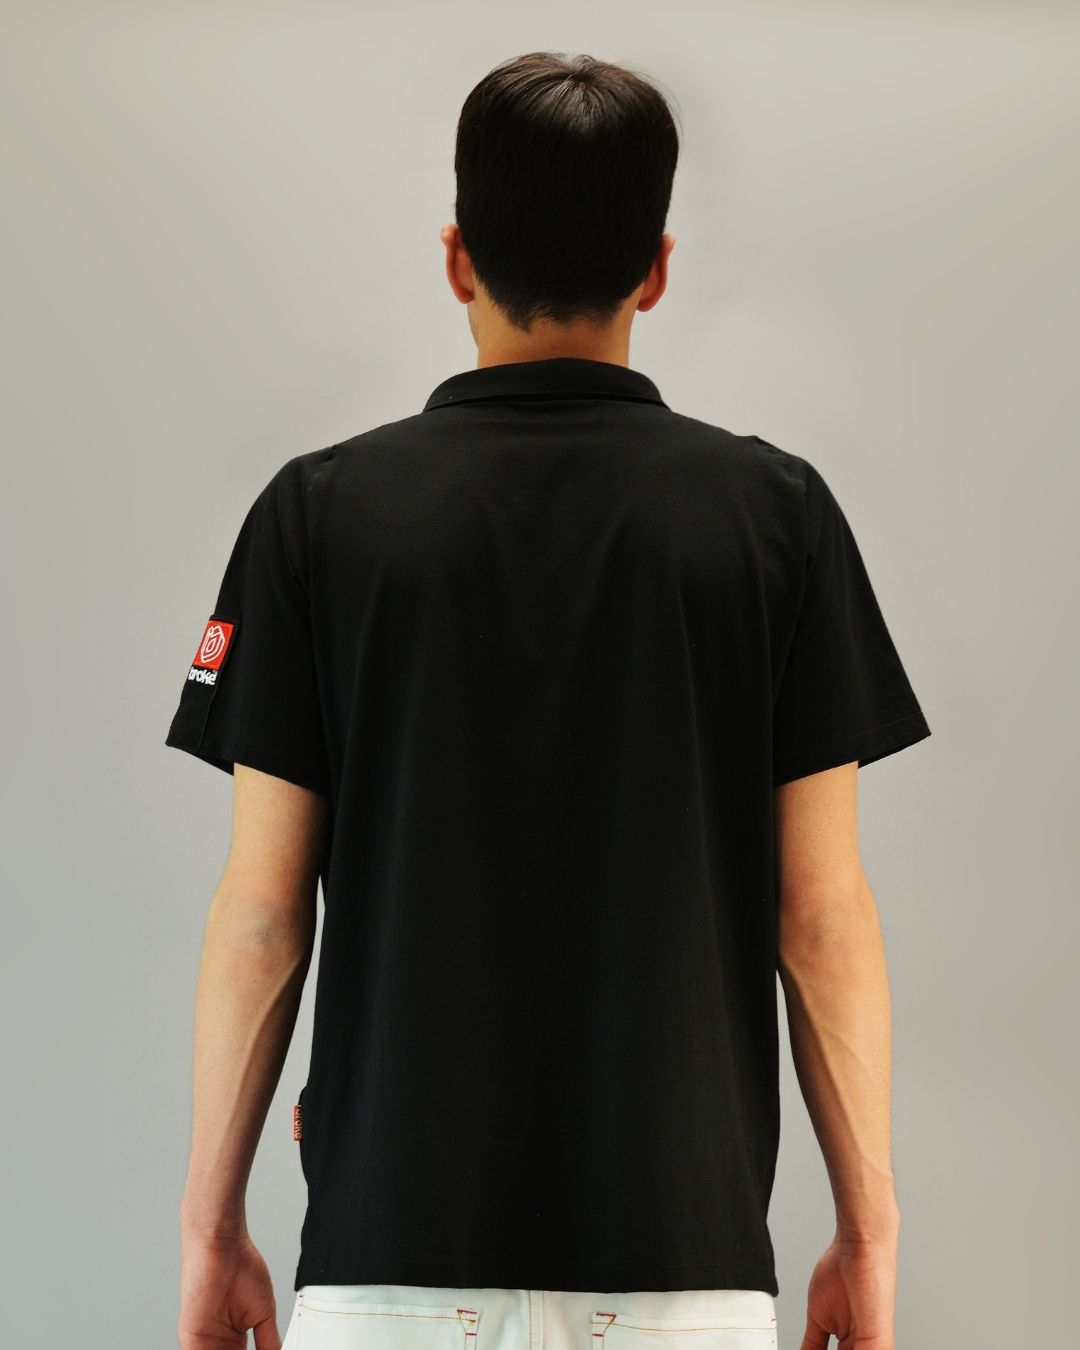 SOLOW BLACK - Polo